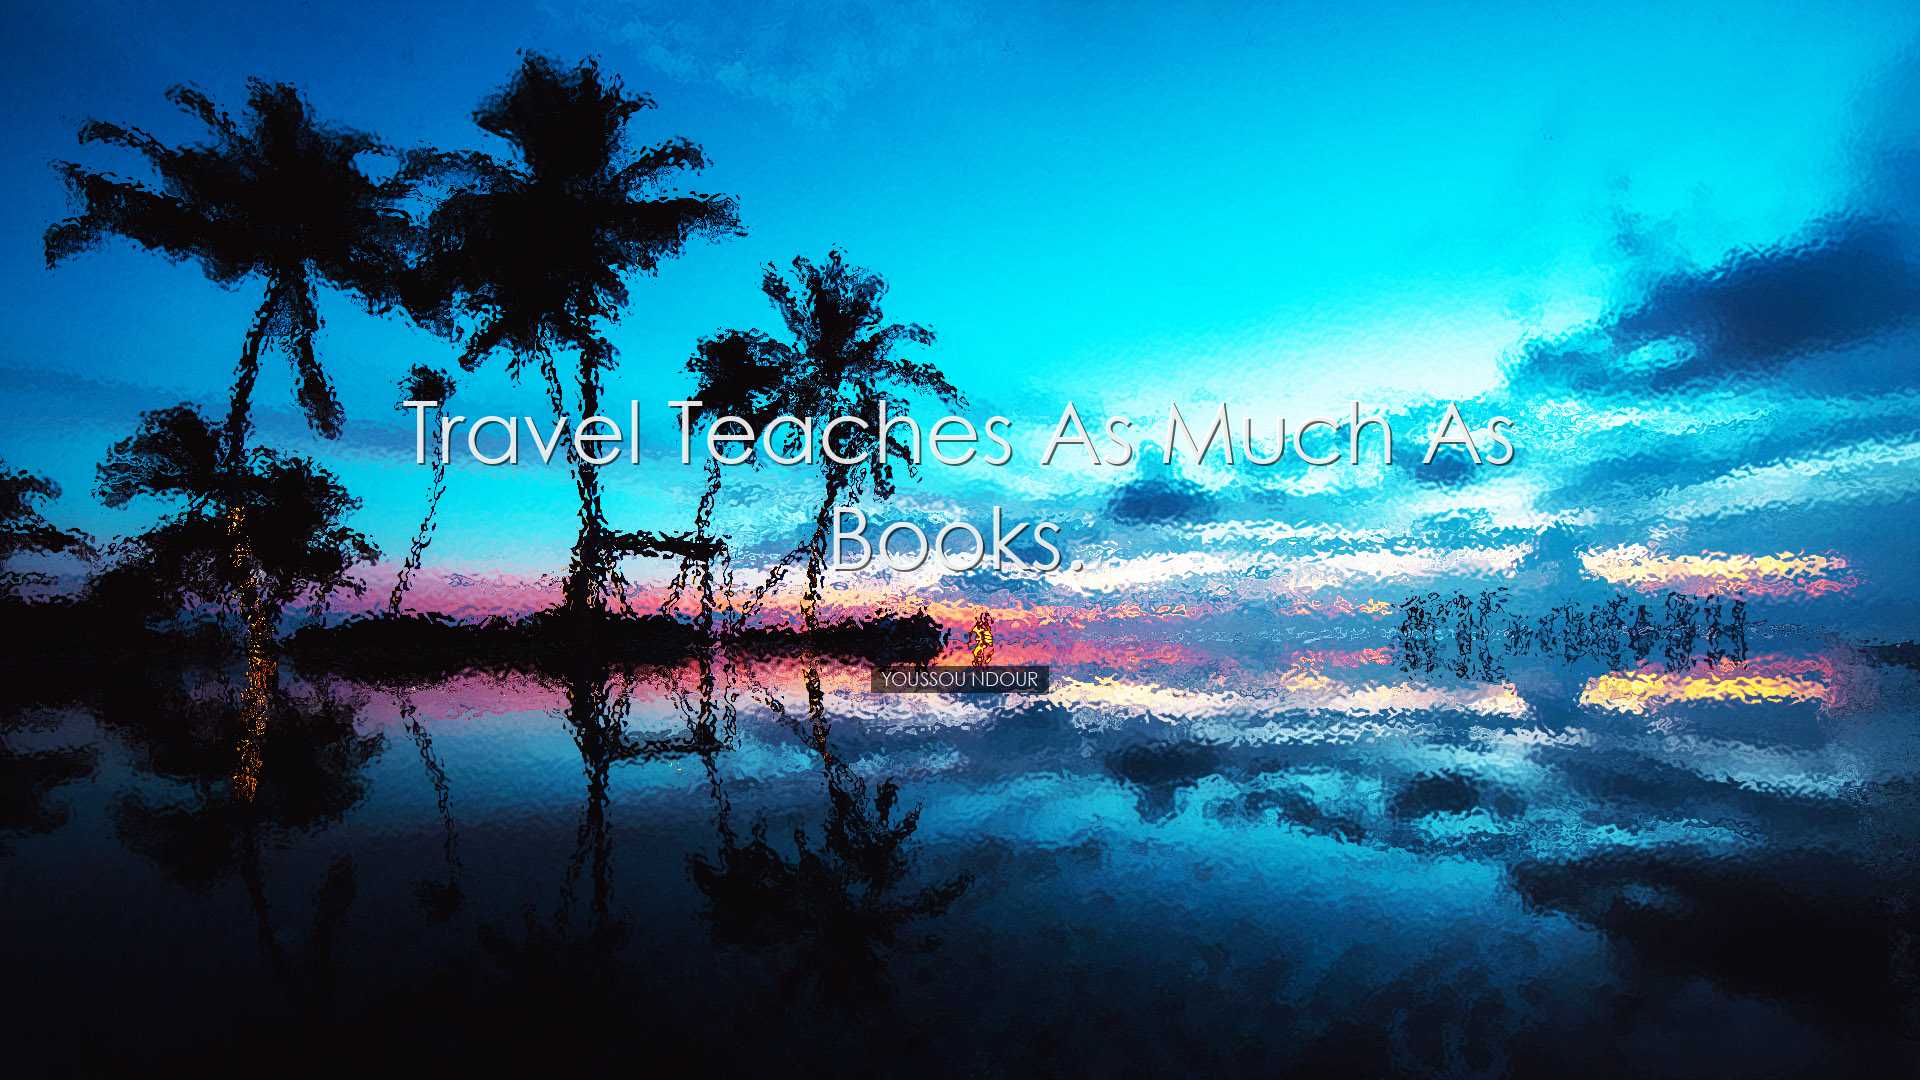 Travel teaches as much as books. - Youssou NDour